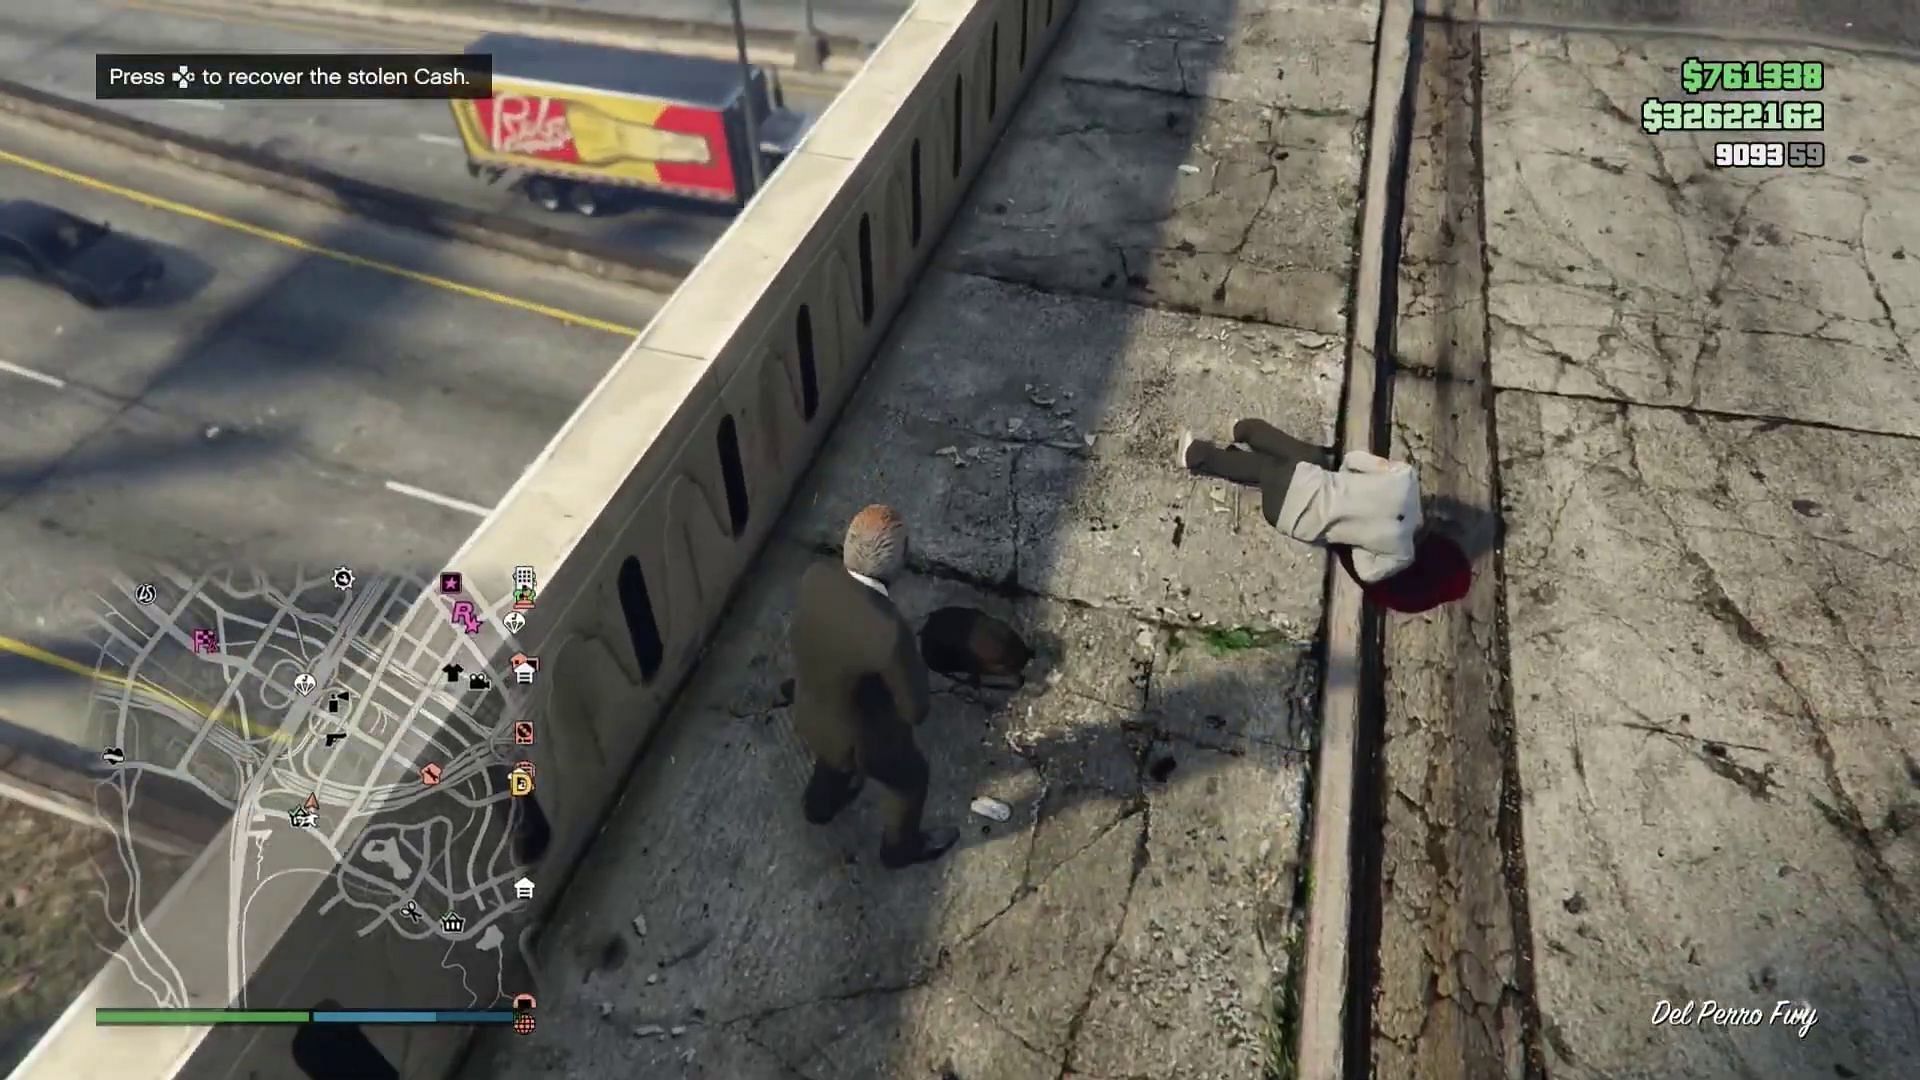 After killing the NPC, the stolen cash should be visible lying on the ground. (Image via TGG/YouTube)